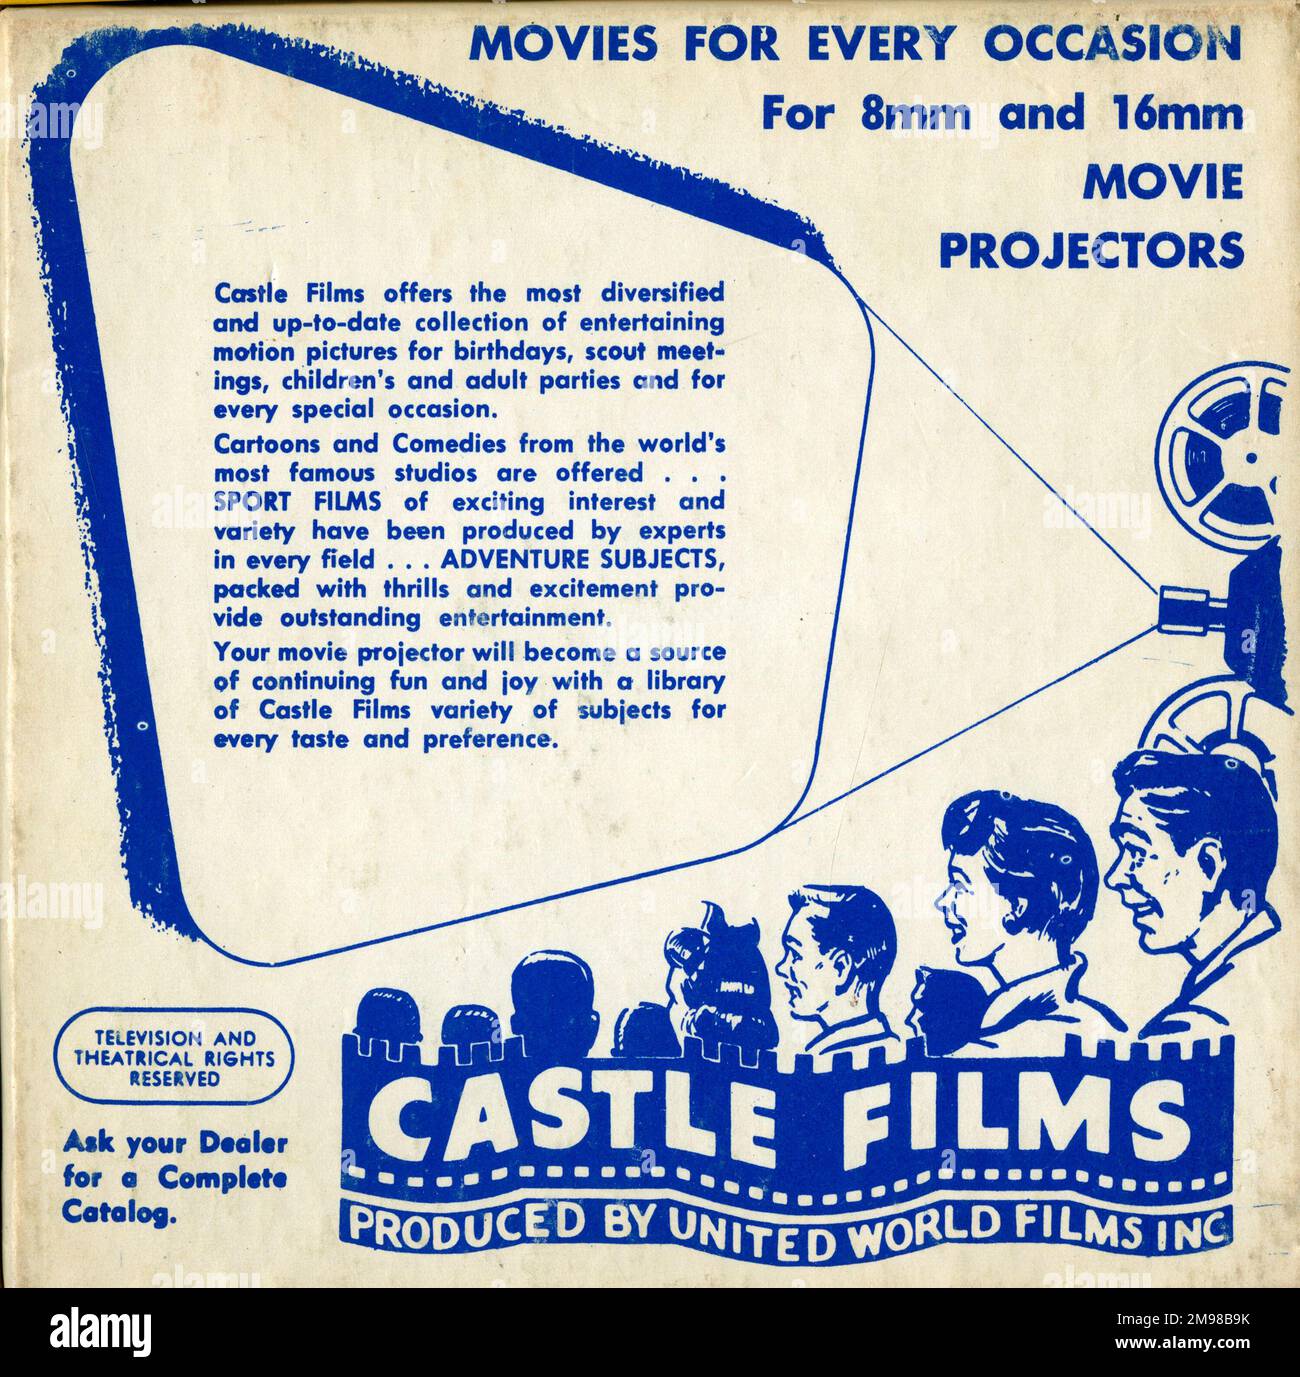 Advertisement for Castle Films, produced by United World Films Inc -- movies for every occasion, for 8mm and 16mm movie film projectors.  Castle Films (later Universal 8) was a home movie distributor based in California. Stock Photo